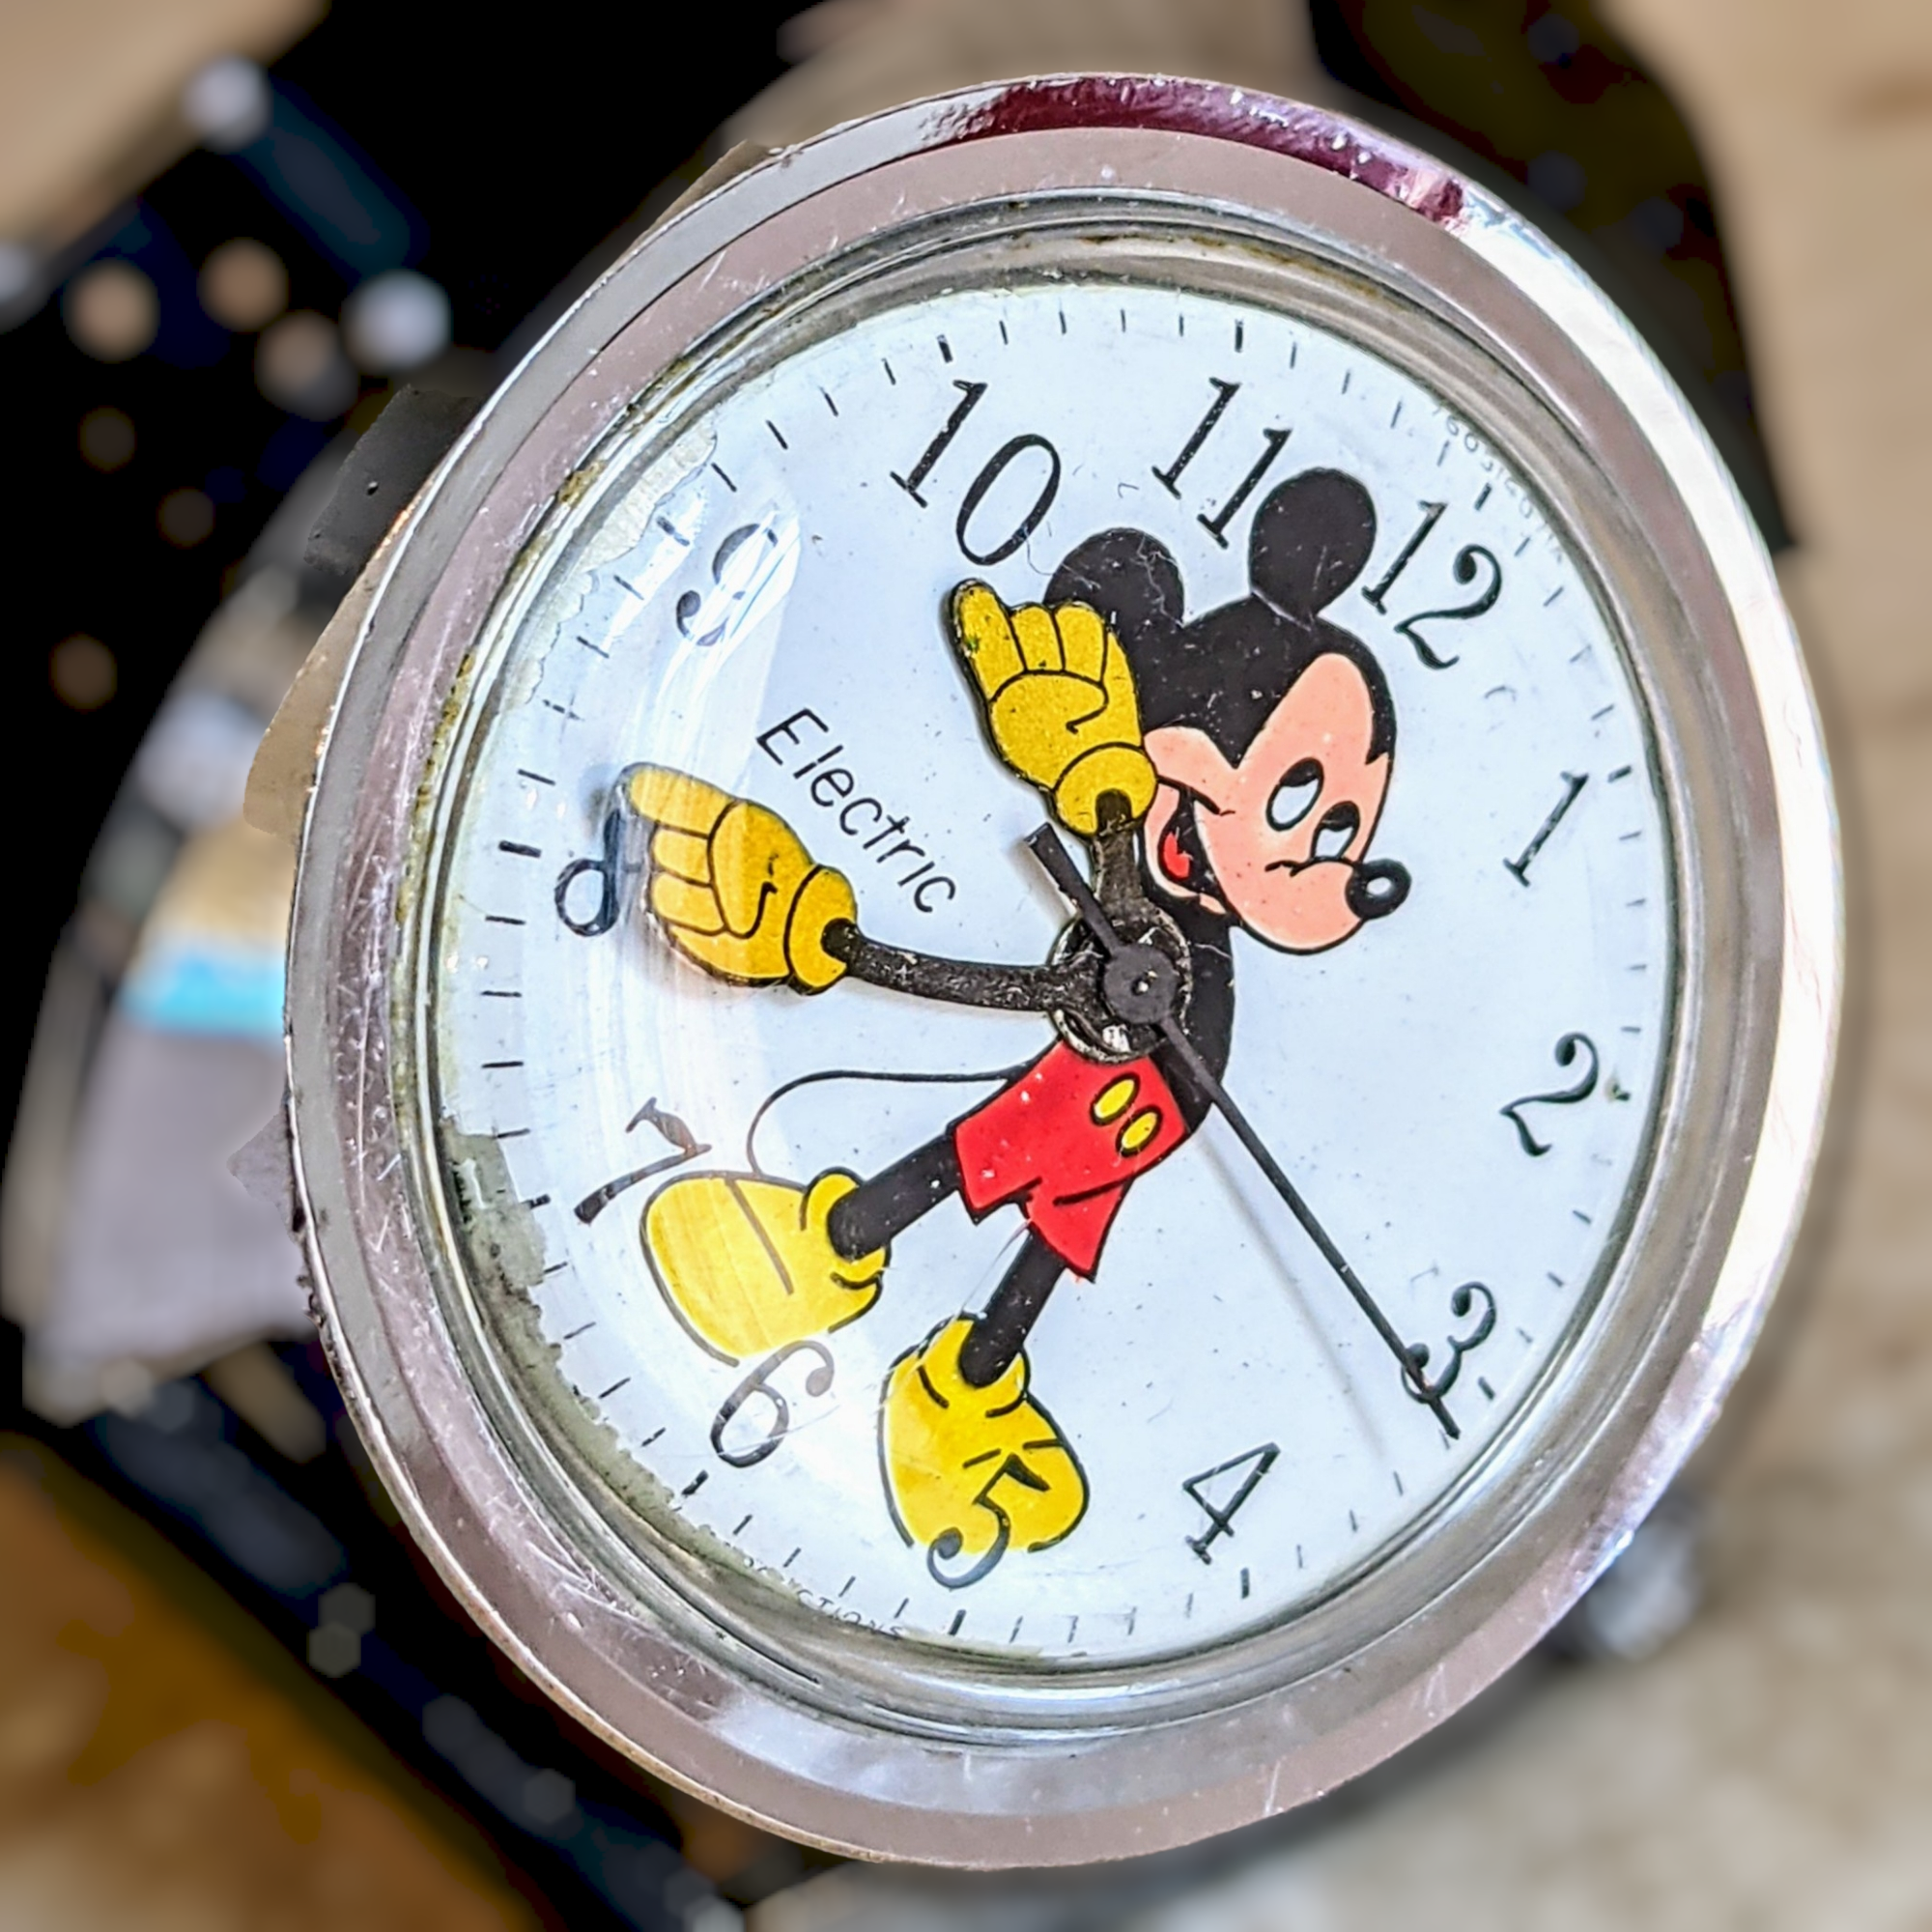 1971 TIMEX Electric Watch Mickey Mouse Vintage Wristwatch Cal. M40